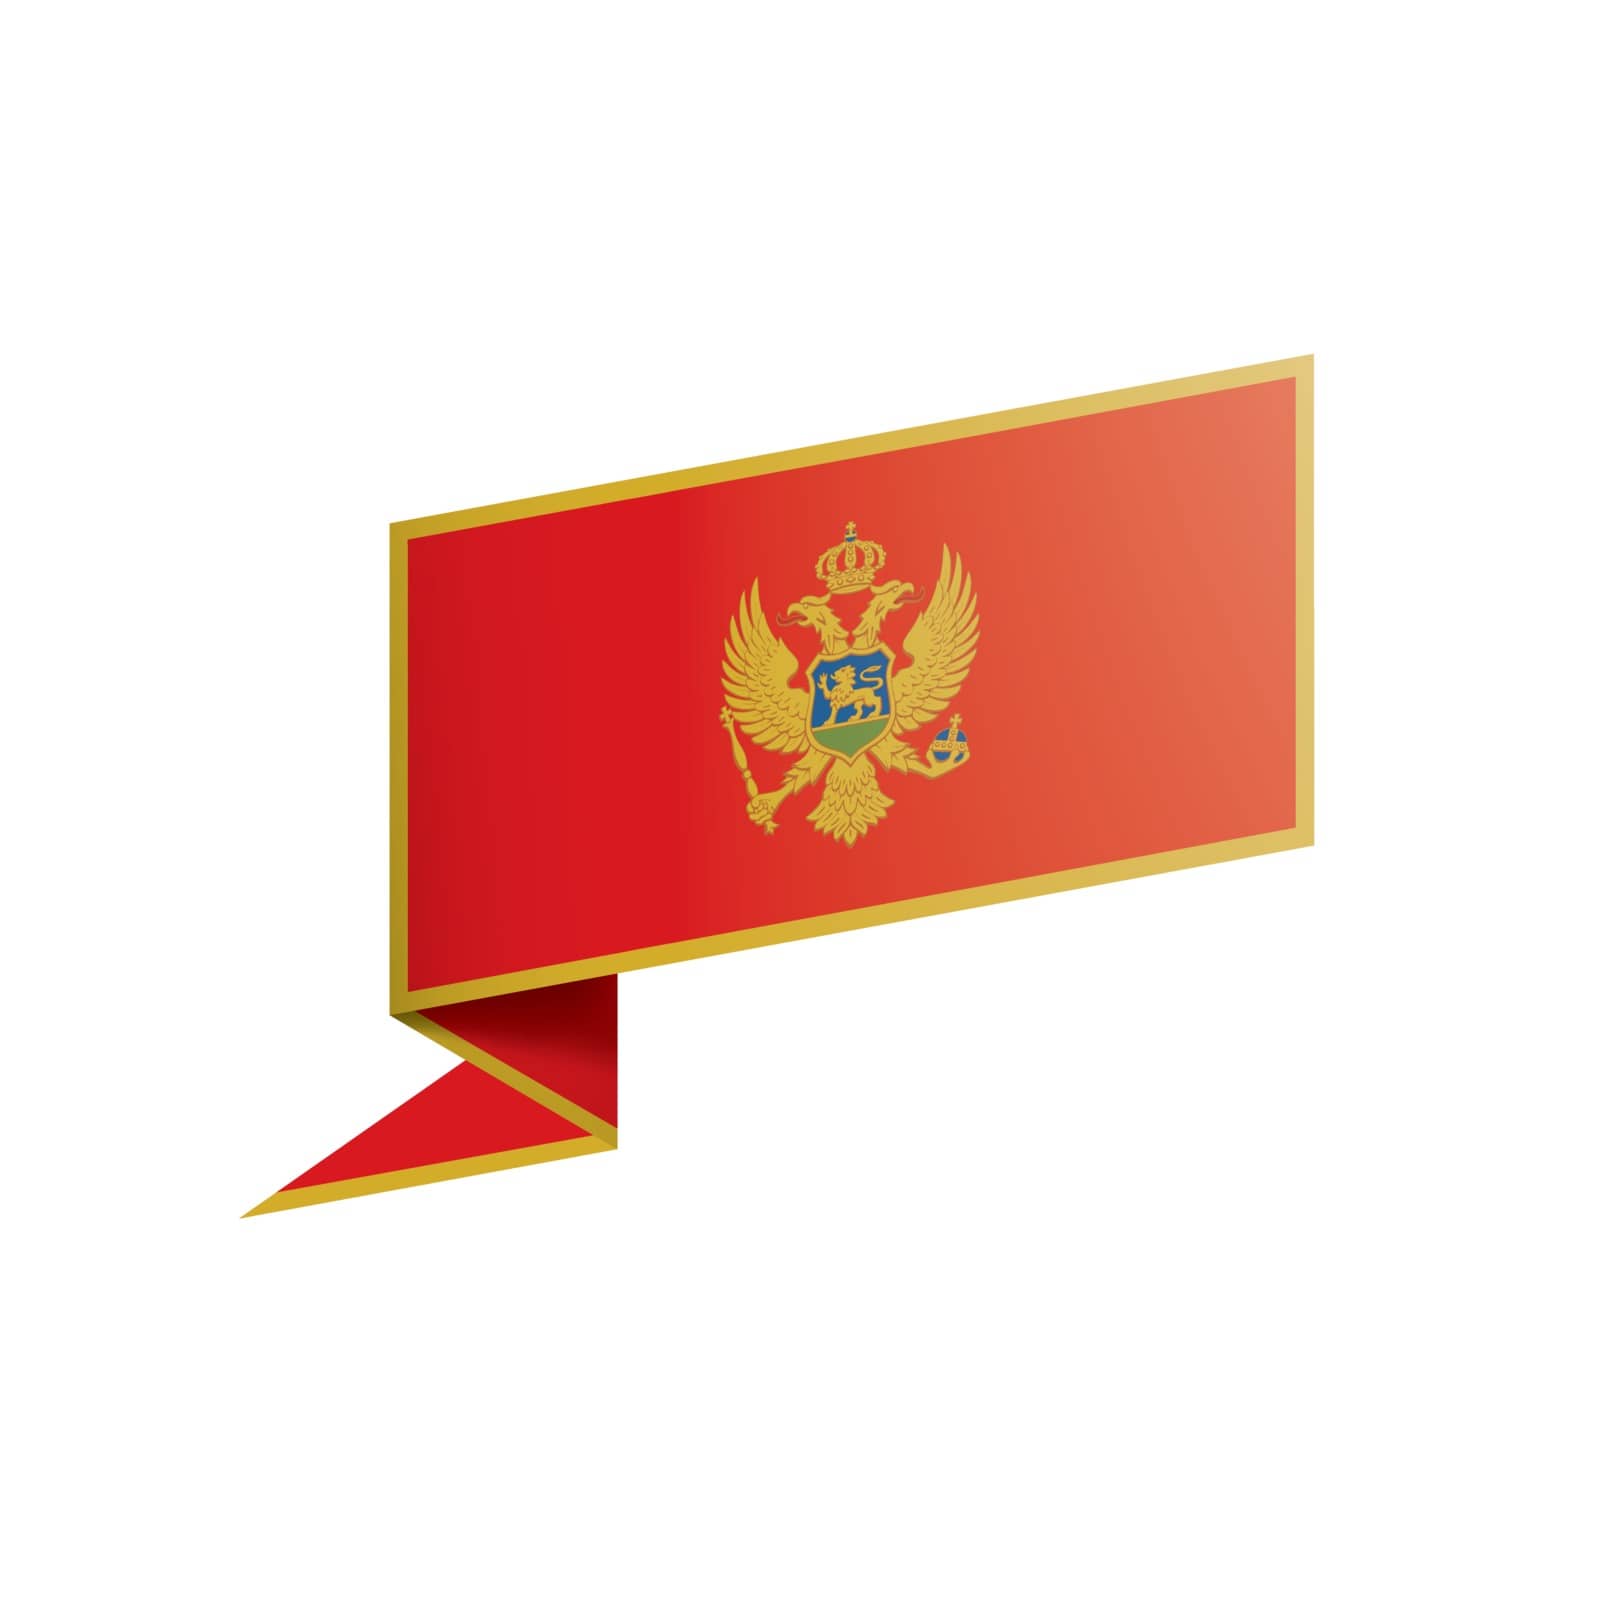 montenegro flag, vector illustration on a white background by butenkow